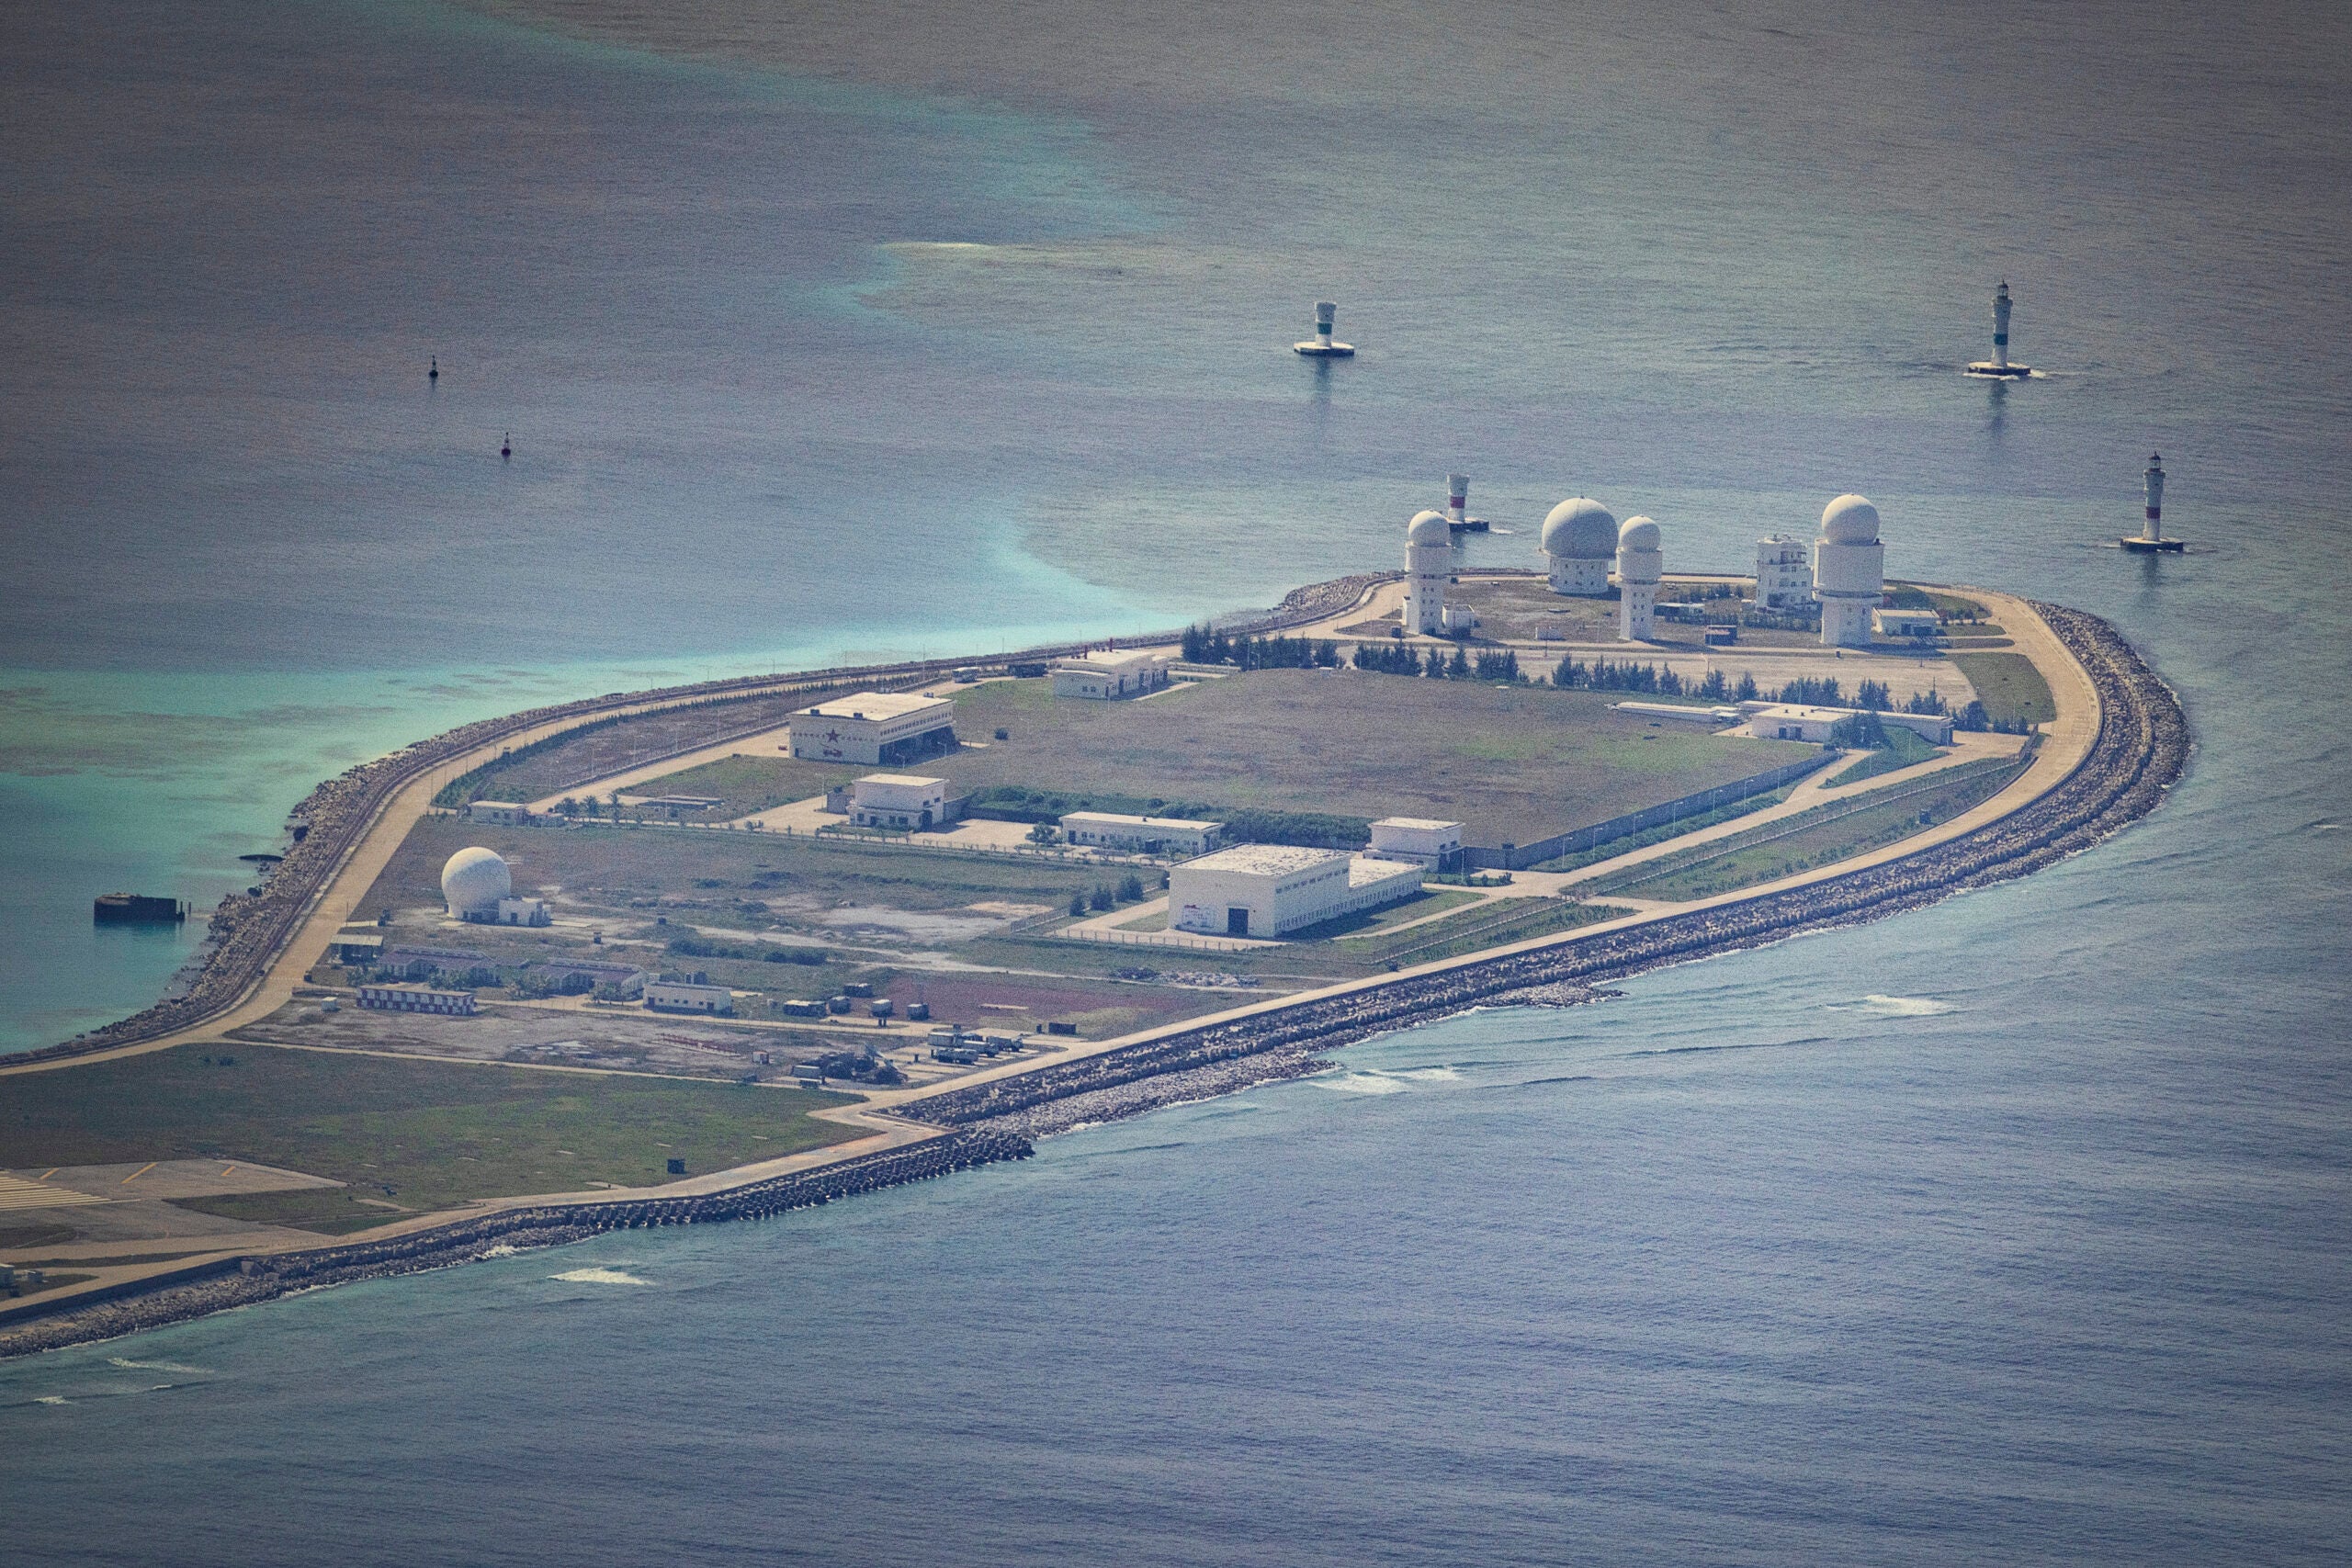 SPRATLY ISLANDS, AT SEA - OCTOBER 25: Buildings and structures are seen on the artificial island built by China in Mischief Reef on October 25, 2022 in Spratly Islands, South China Sea. China has progressively asserted its claim of ownership over disputed islands in the South China Sea by artificially increasing the size of islands, creating new islands and building ports, military outposts and airstrips. The South China sea is an important trade route and is of significant interest as geopolitical tensions remain high in the region. (Photo by Ezra Acayan/Getty Images)